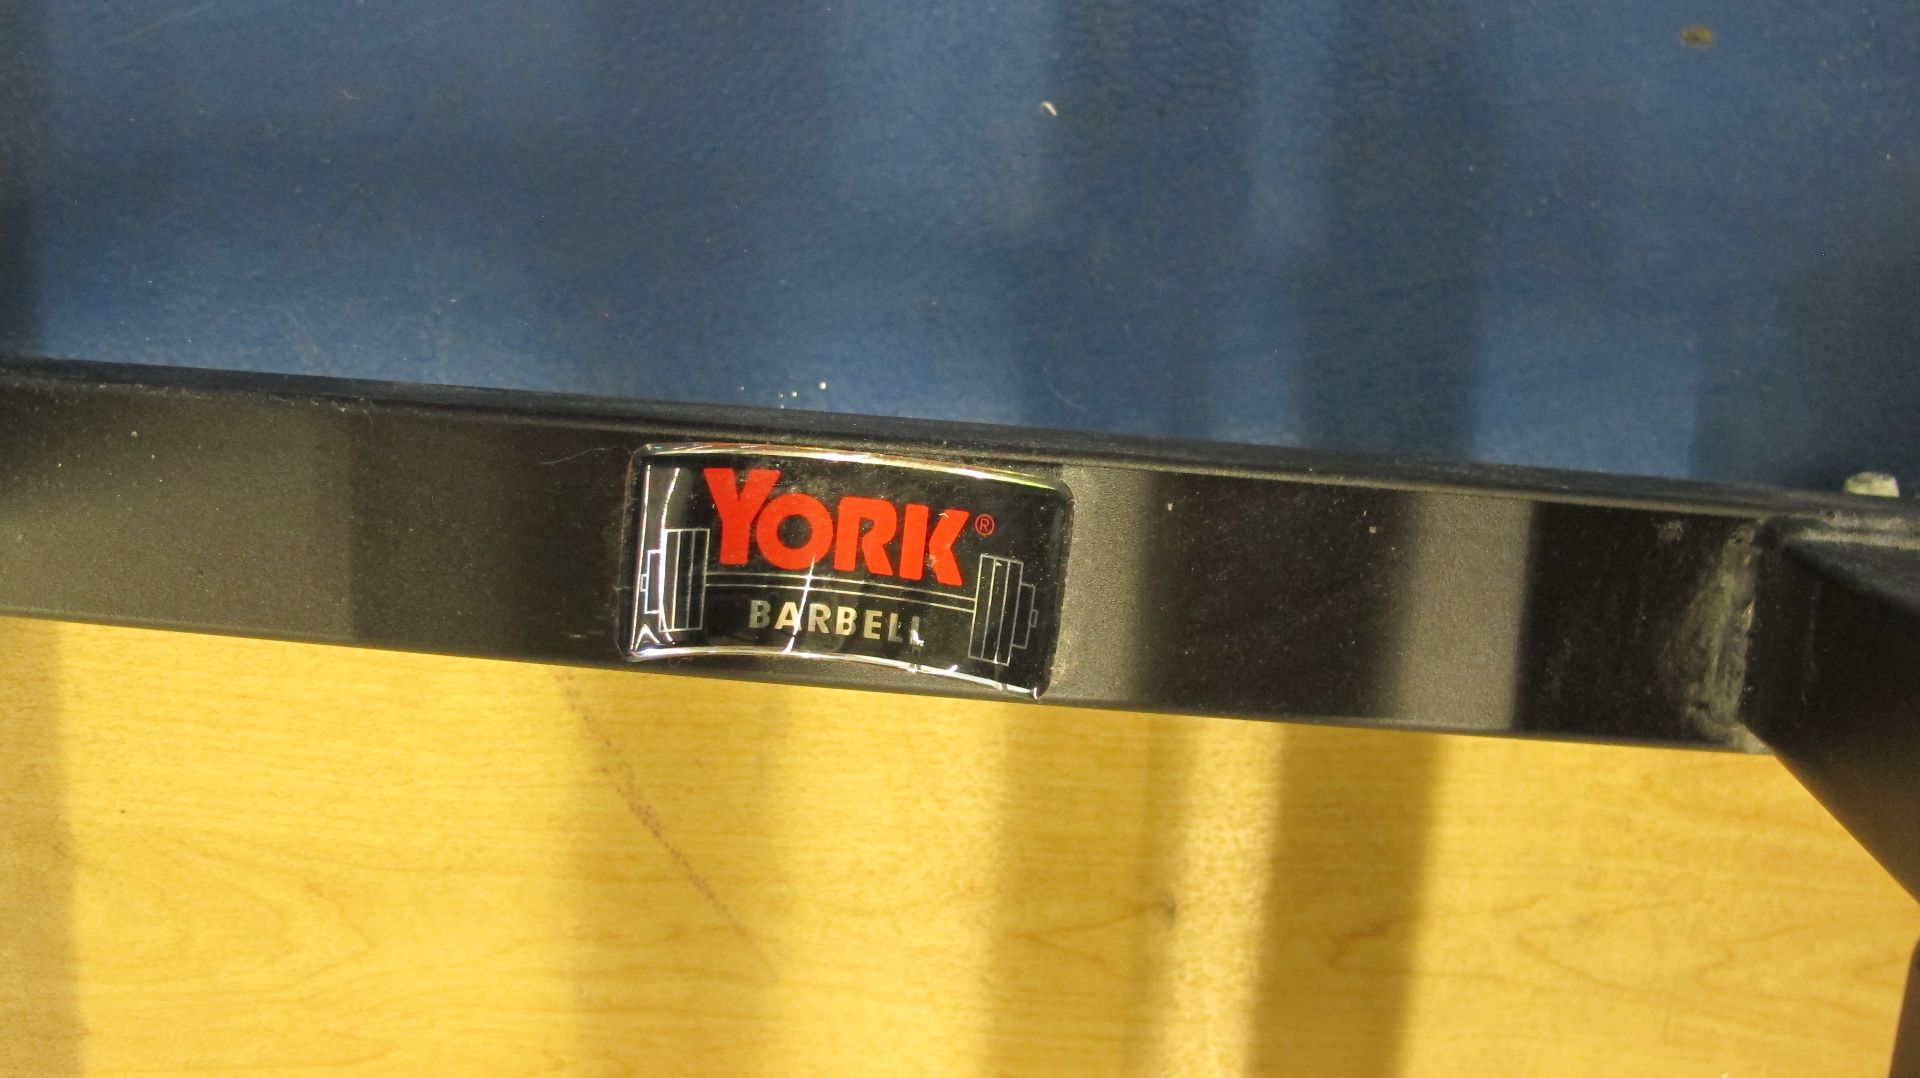 YORK Plate Storage Rack on Casters - Image 3 of 3